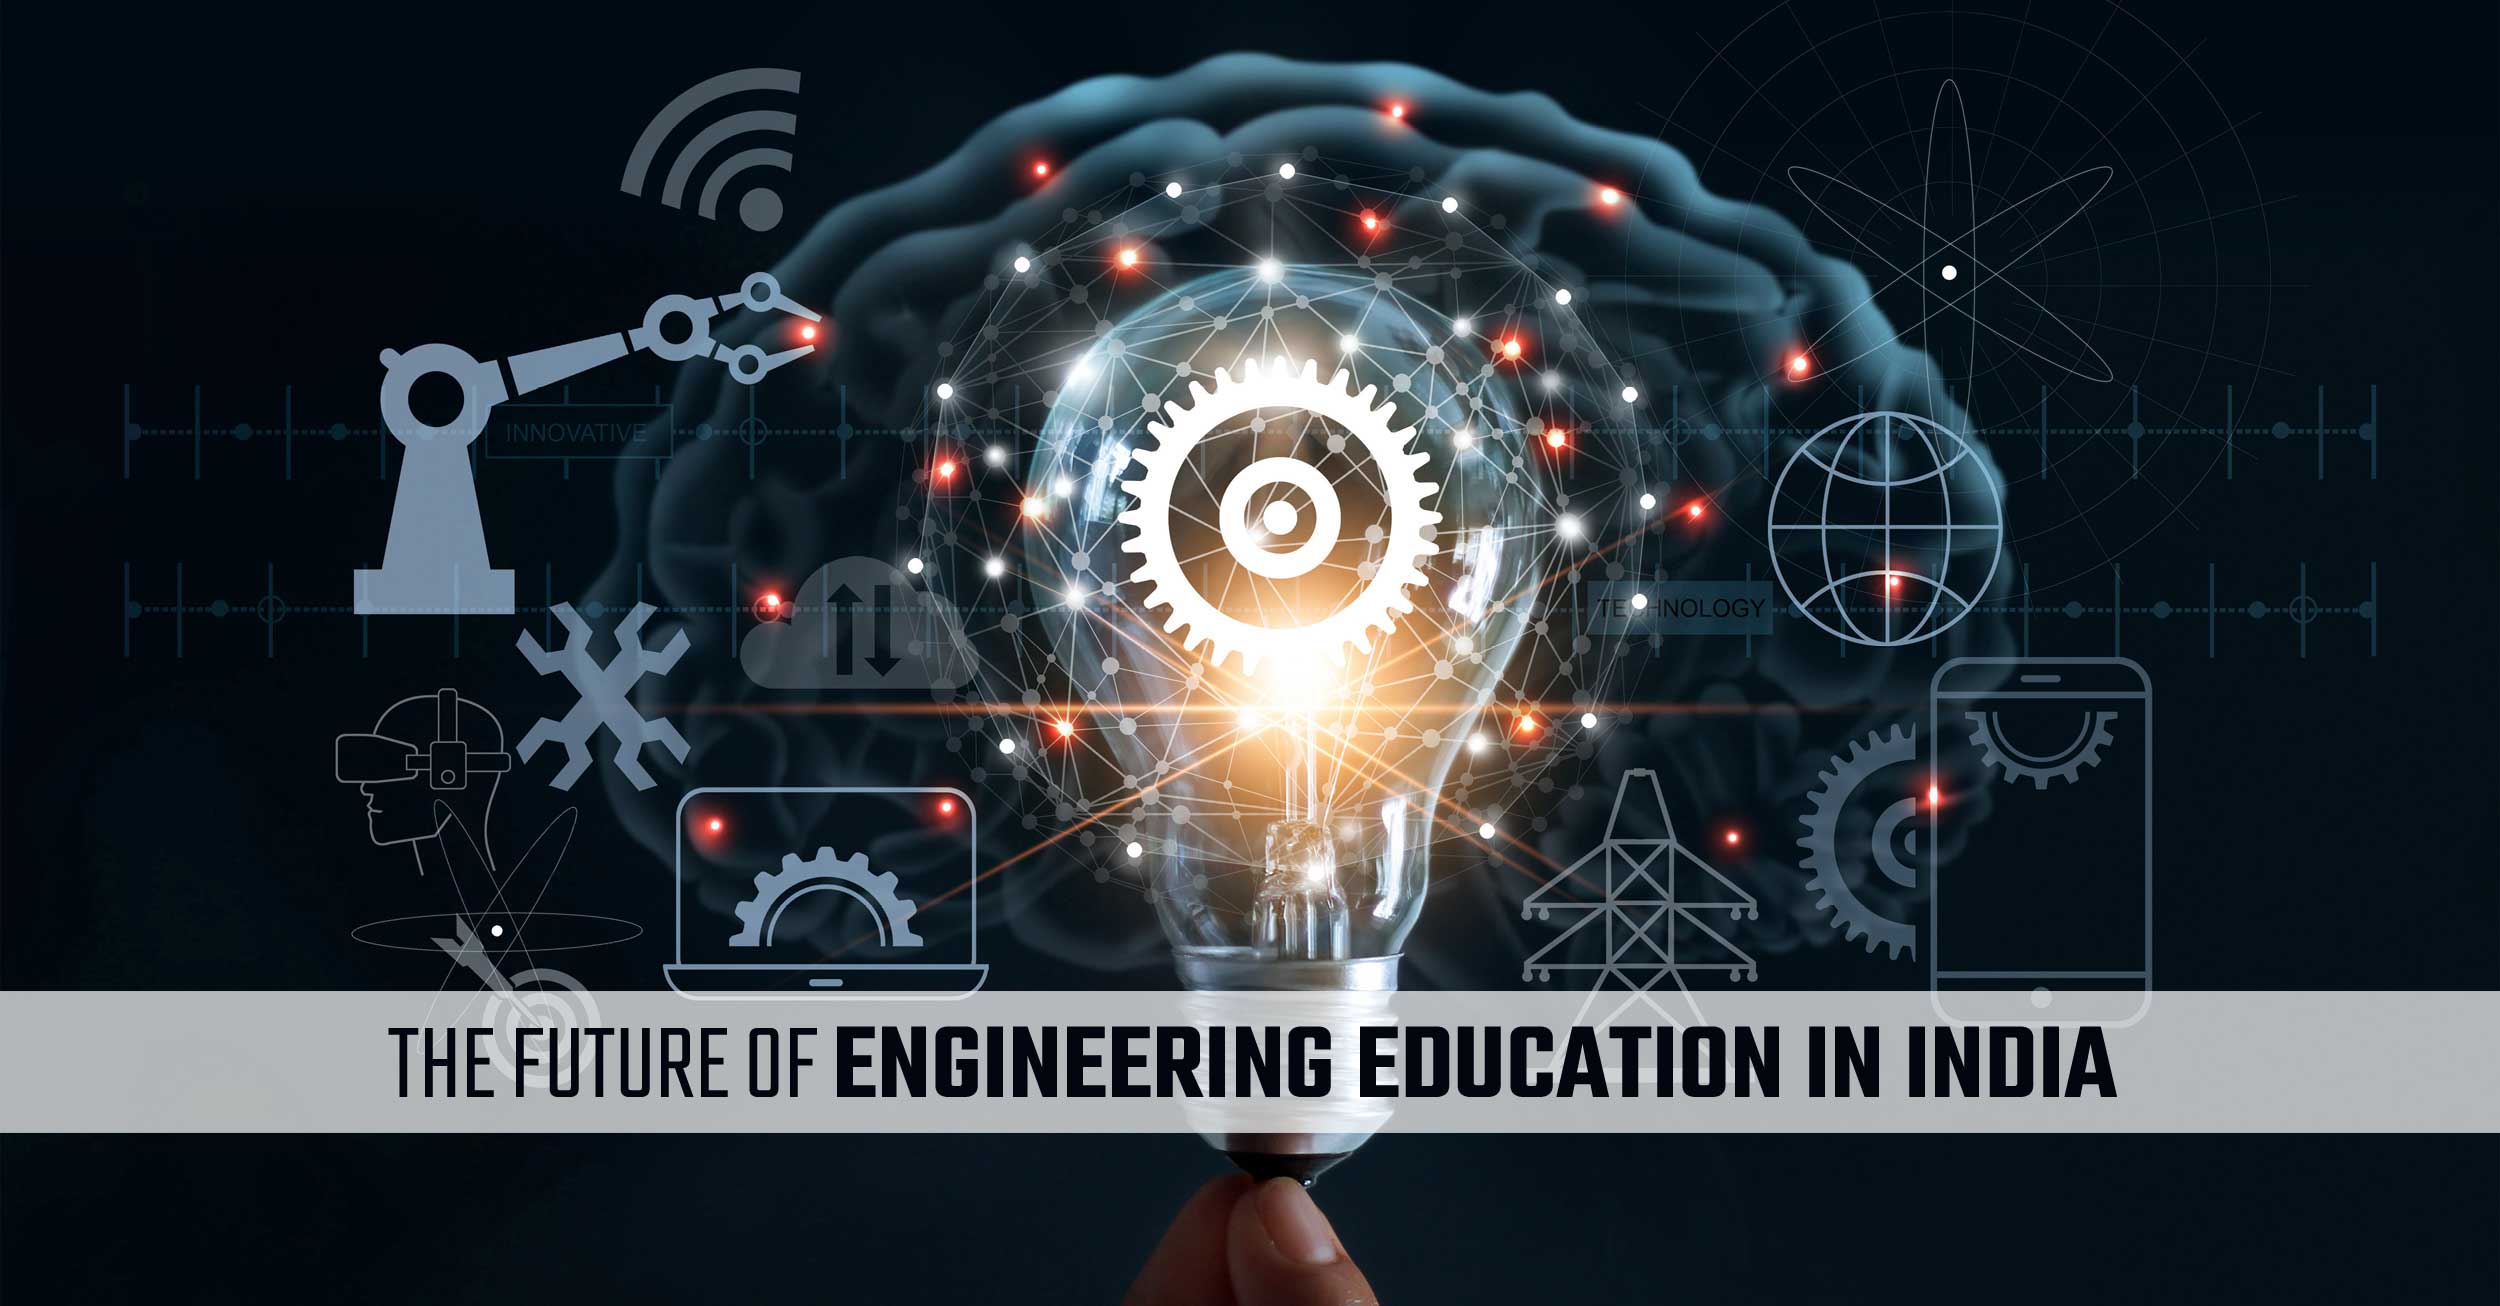 The Future of Engineering Education in India